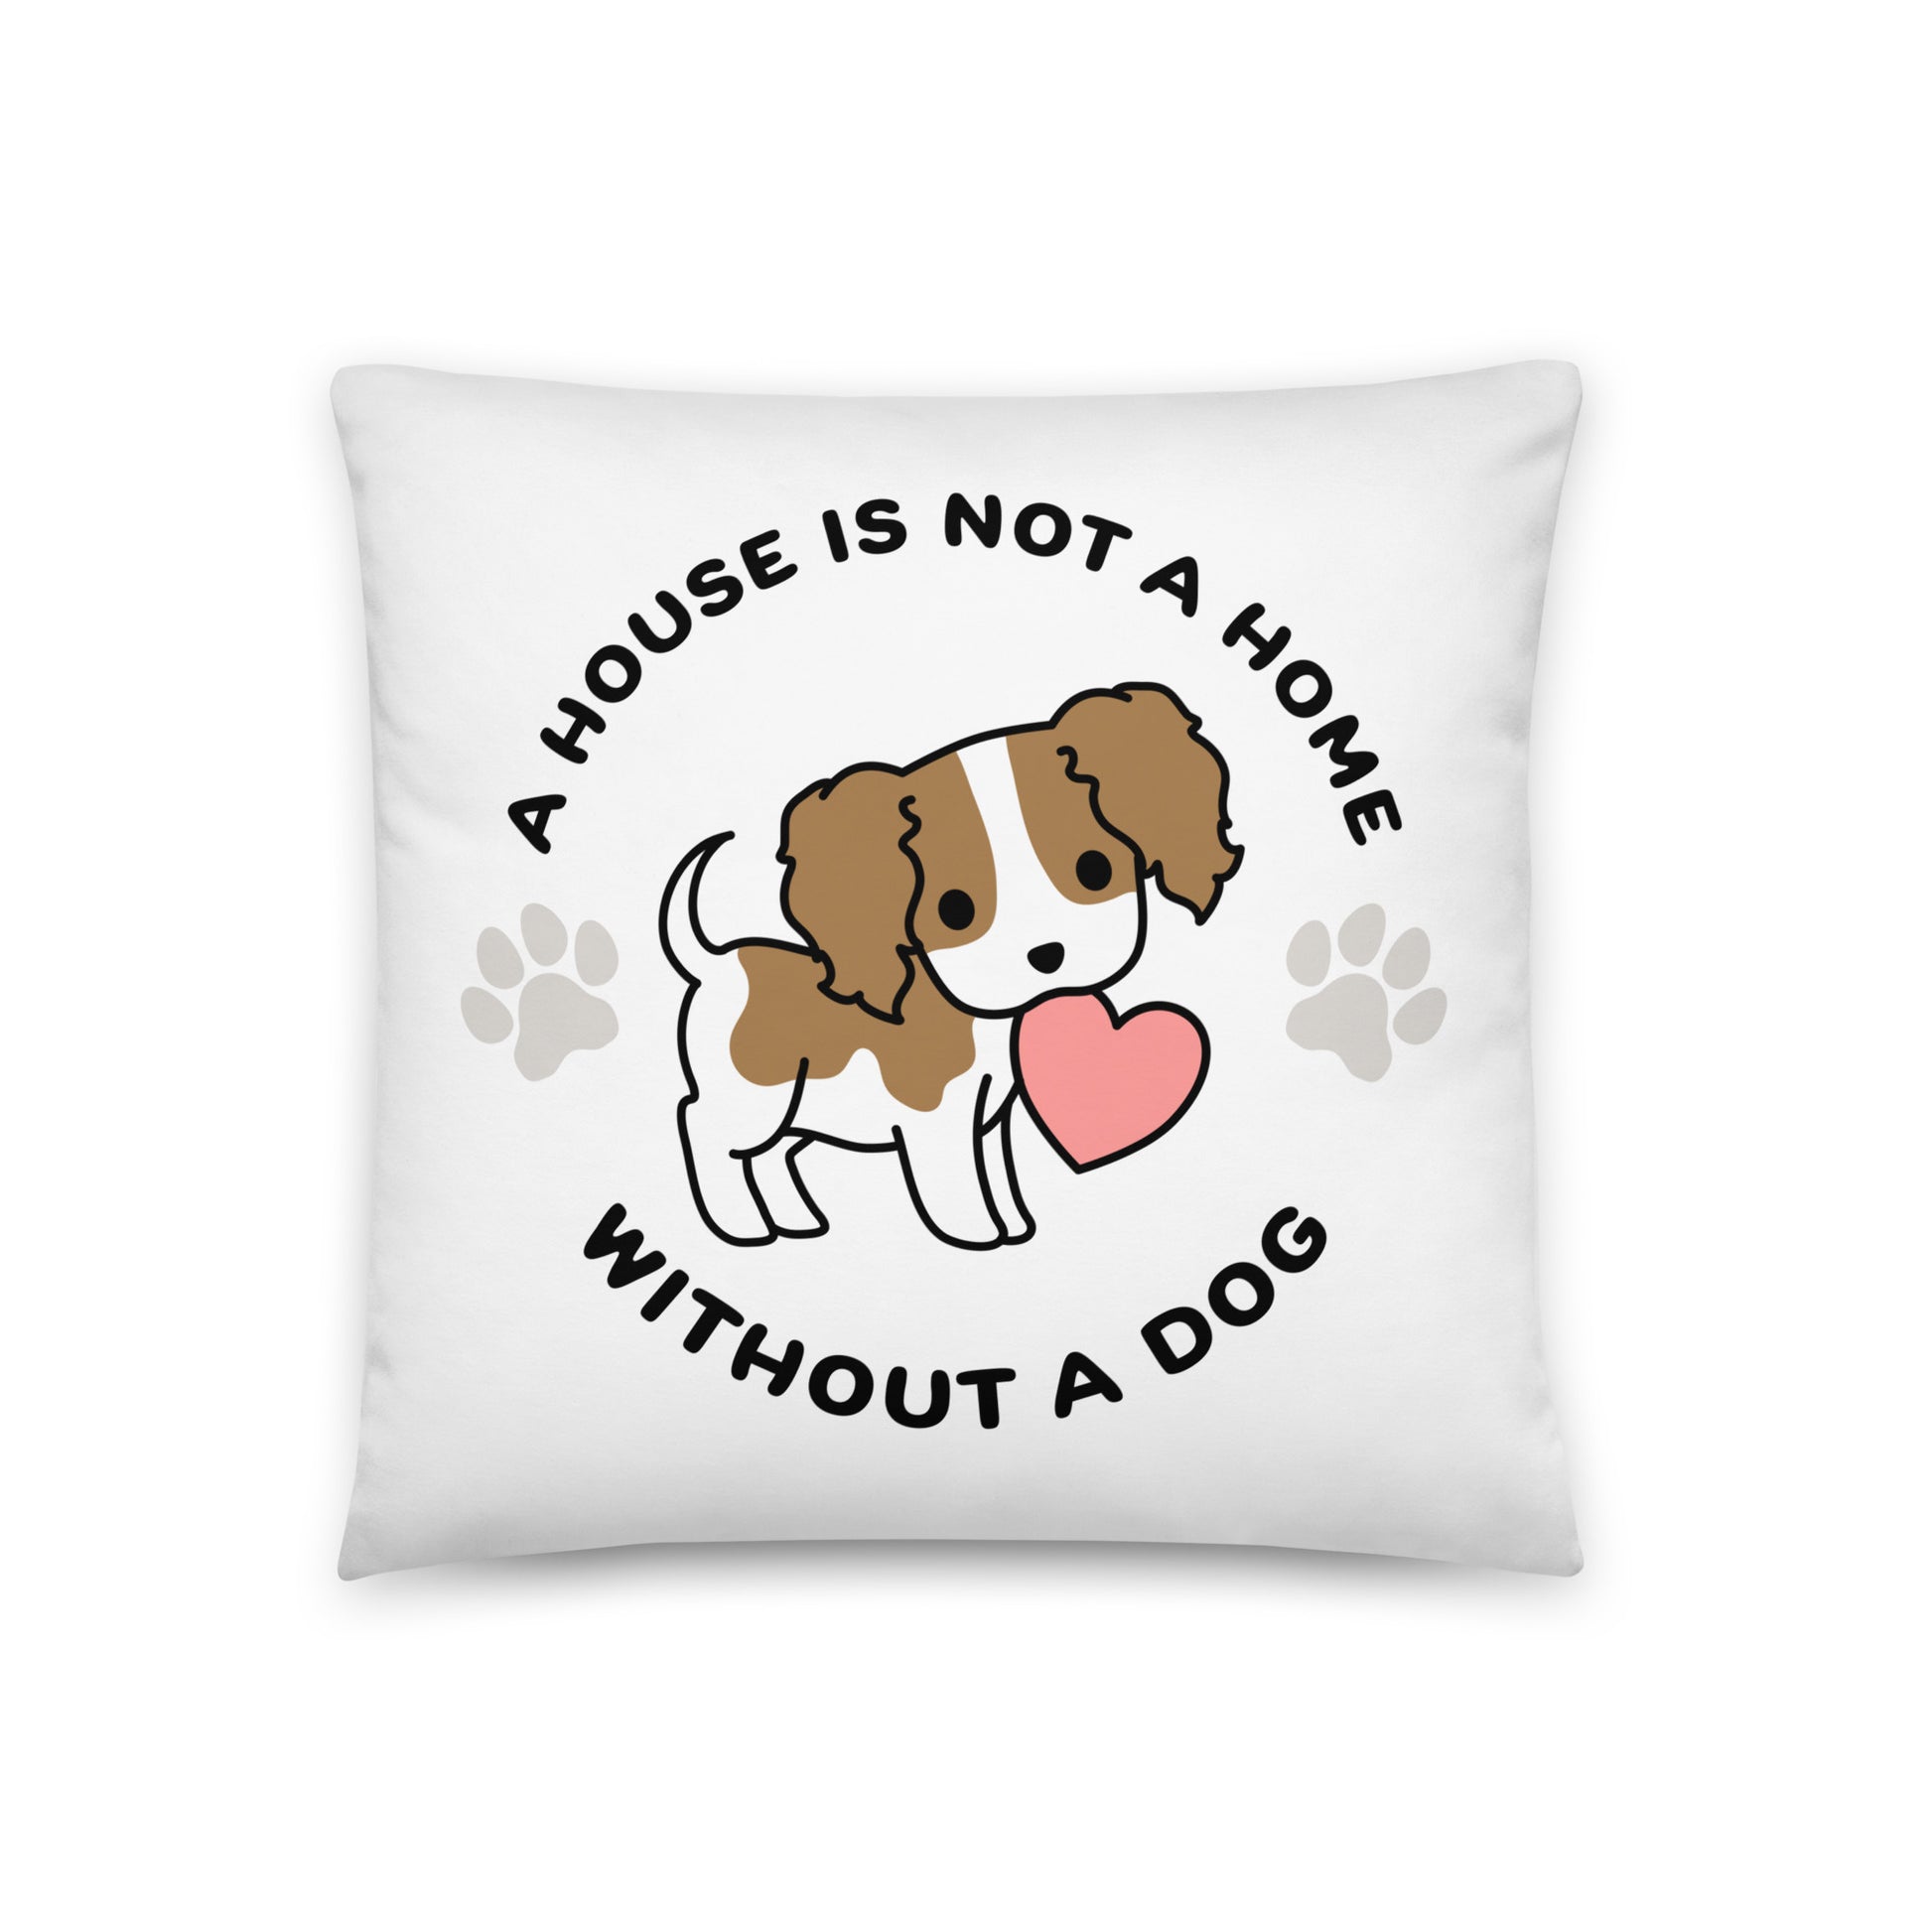 A white, 18" x 18" pillow featuing a cute, stylized illustration of a Cavalier King Charles Spaniel holding a heart in its mouth. Text in a circle around the dog reads "A house is not a home without a dog"